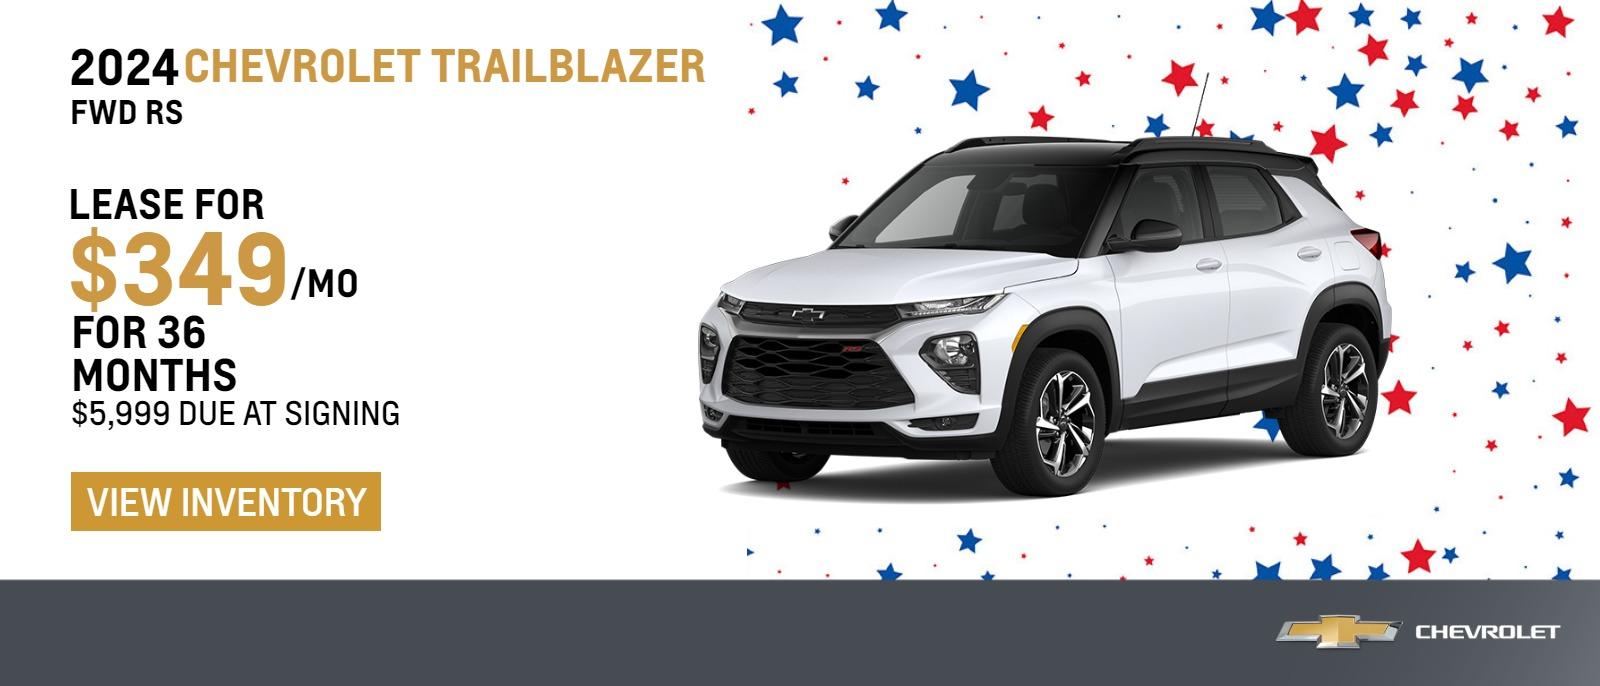 2024 Chevrolet Trailblazer FWD RS
$349 Month Lease | 36 Months | $5999 Due at signing